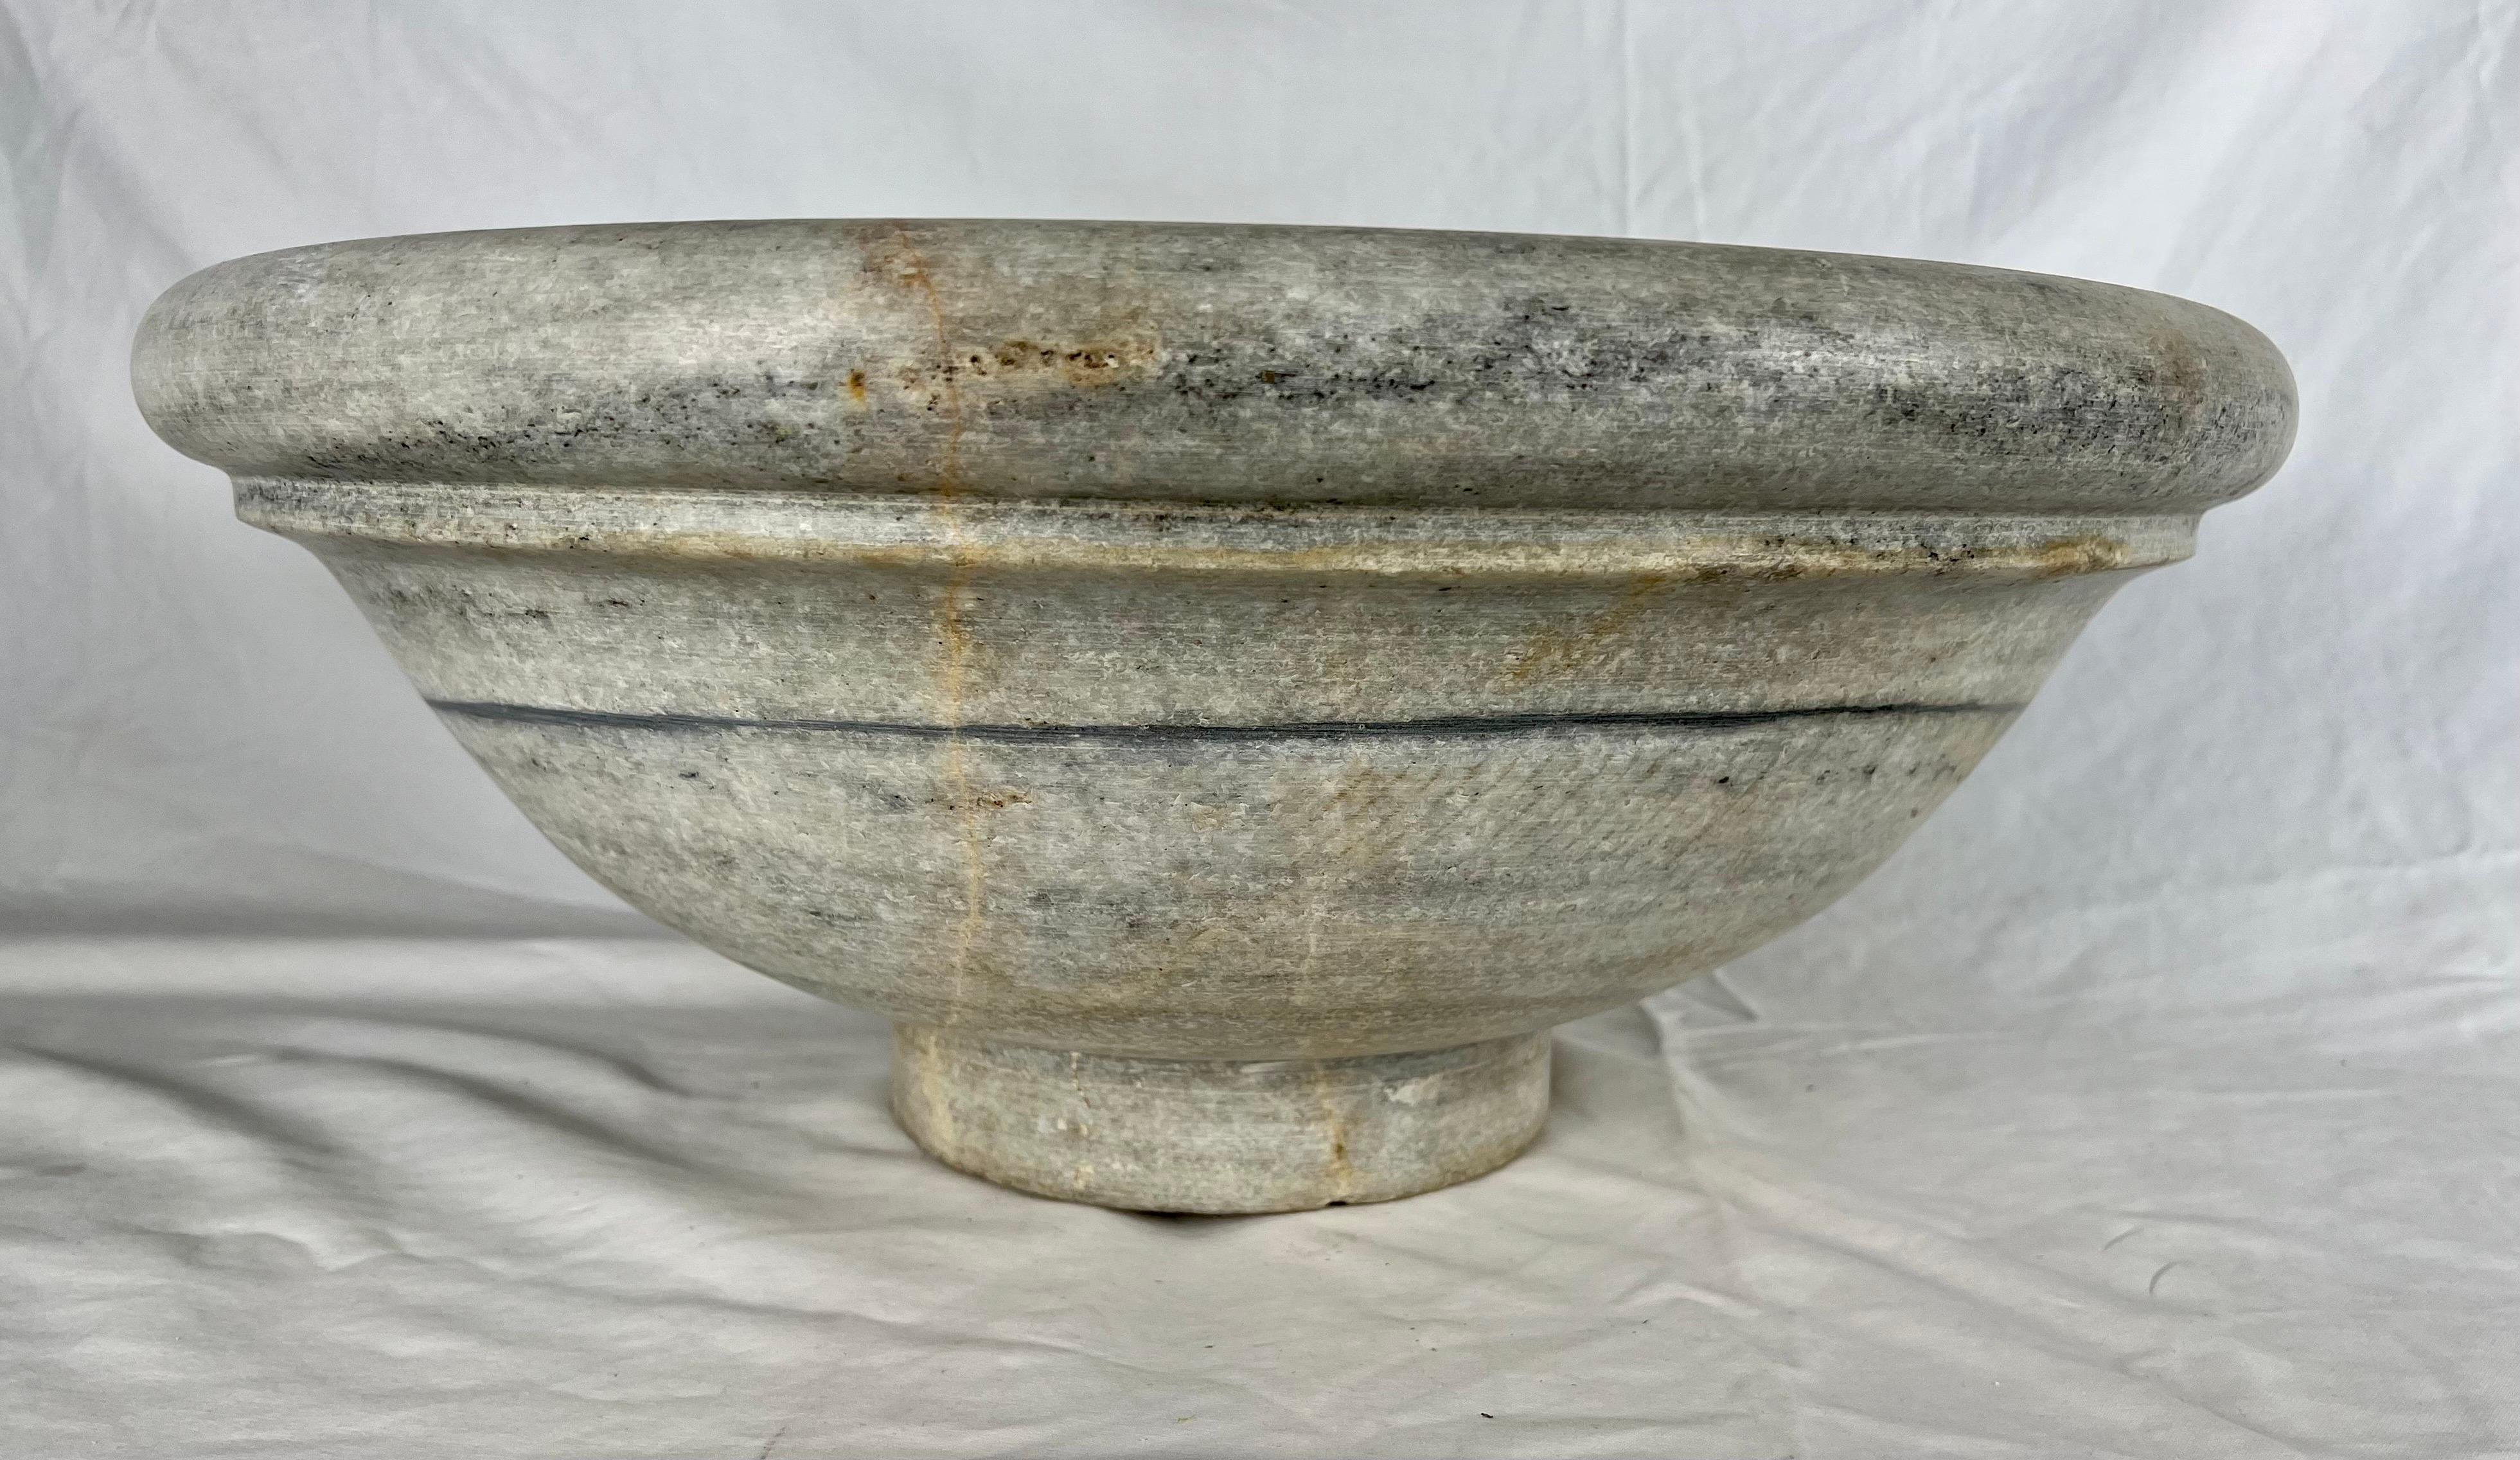 Italian early 20th century round shaped carved limestone sink with drain hole.